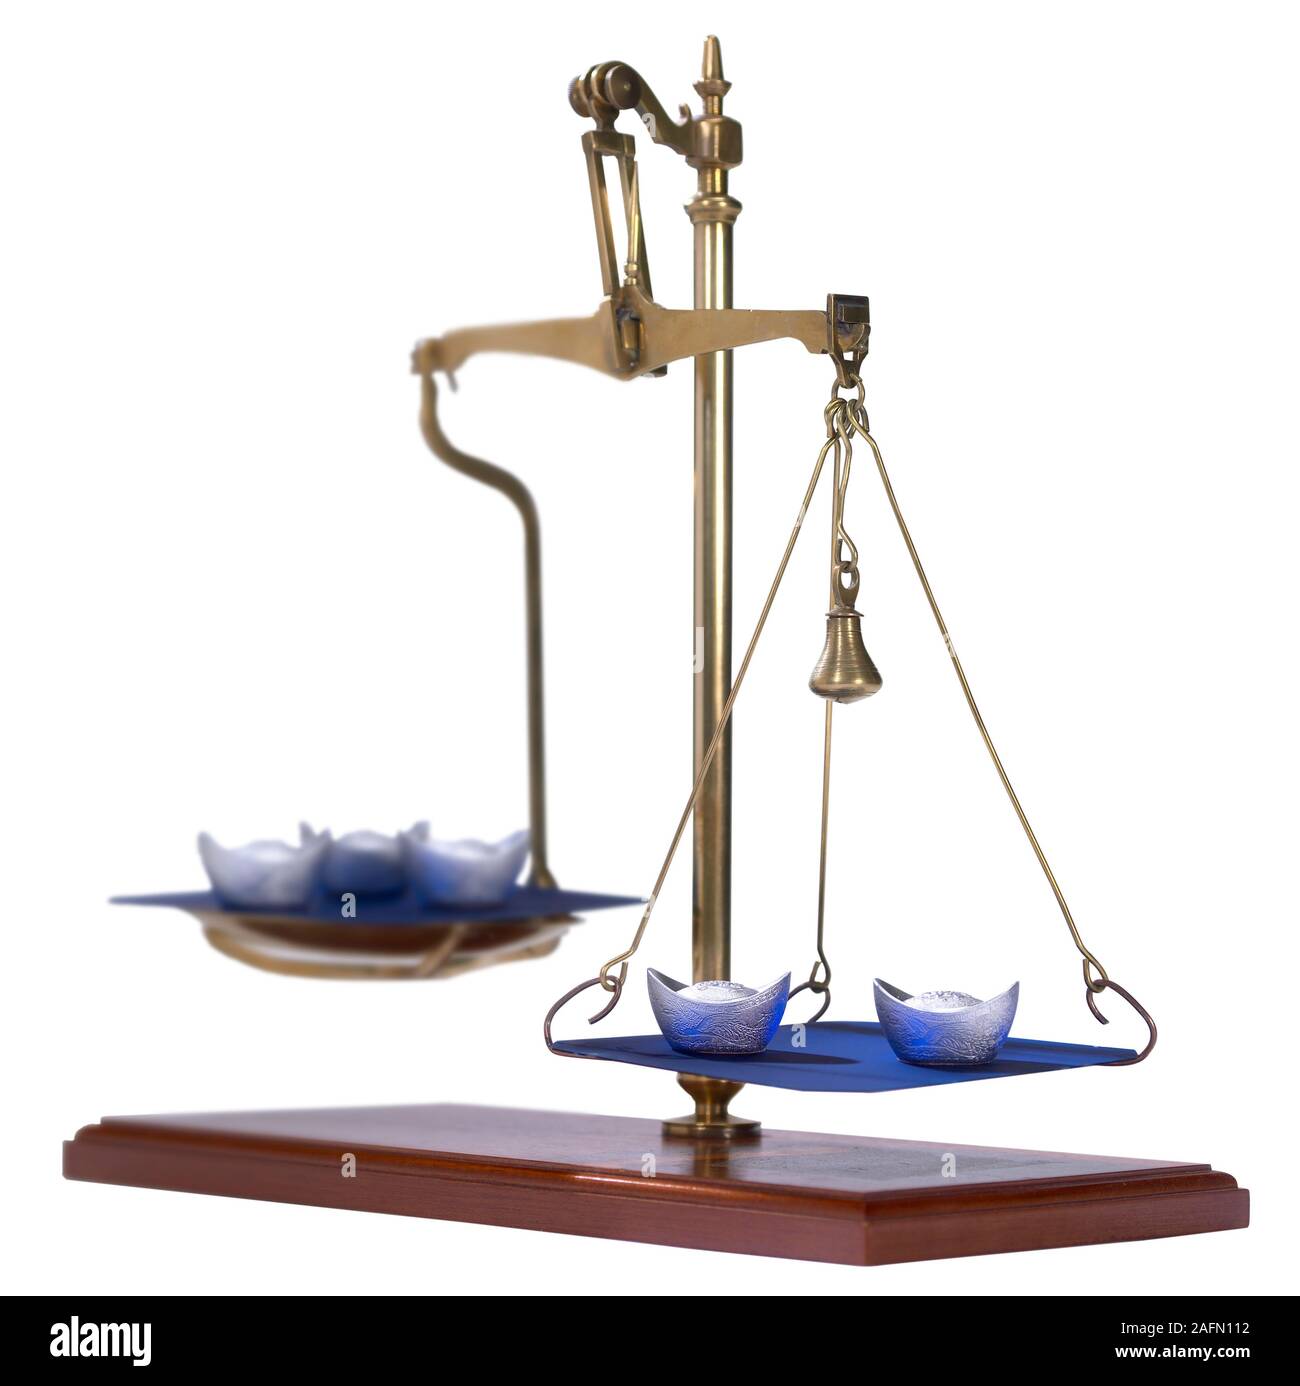 Antique scale weighing imbalance Stock Photo